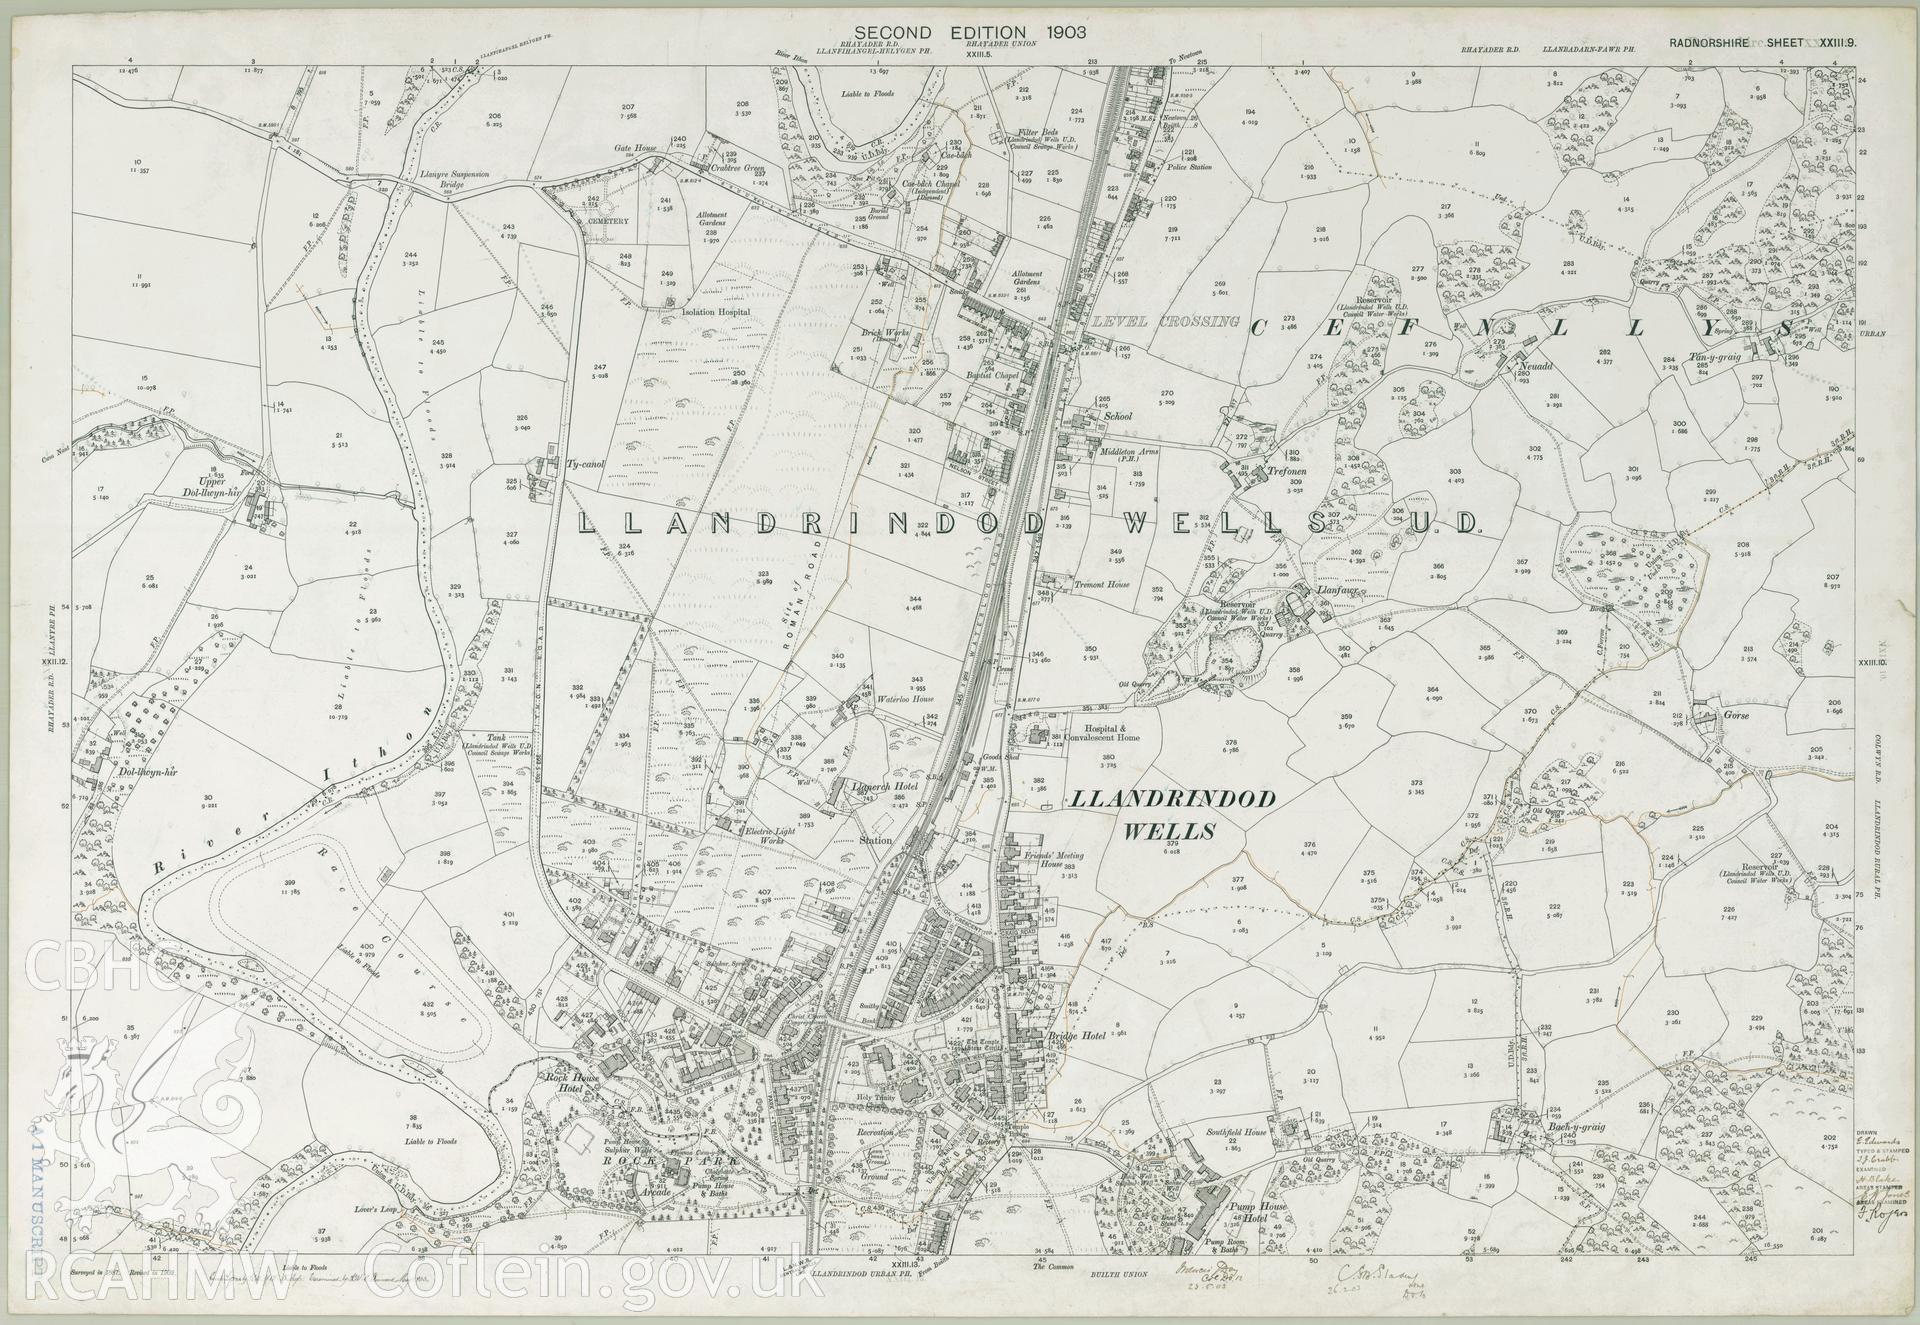 Digital copy of an Ordnance Survey second edition county series map, six inch, 1:10560, ungridded, showing Llandrindod Wells area.